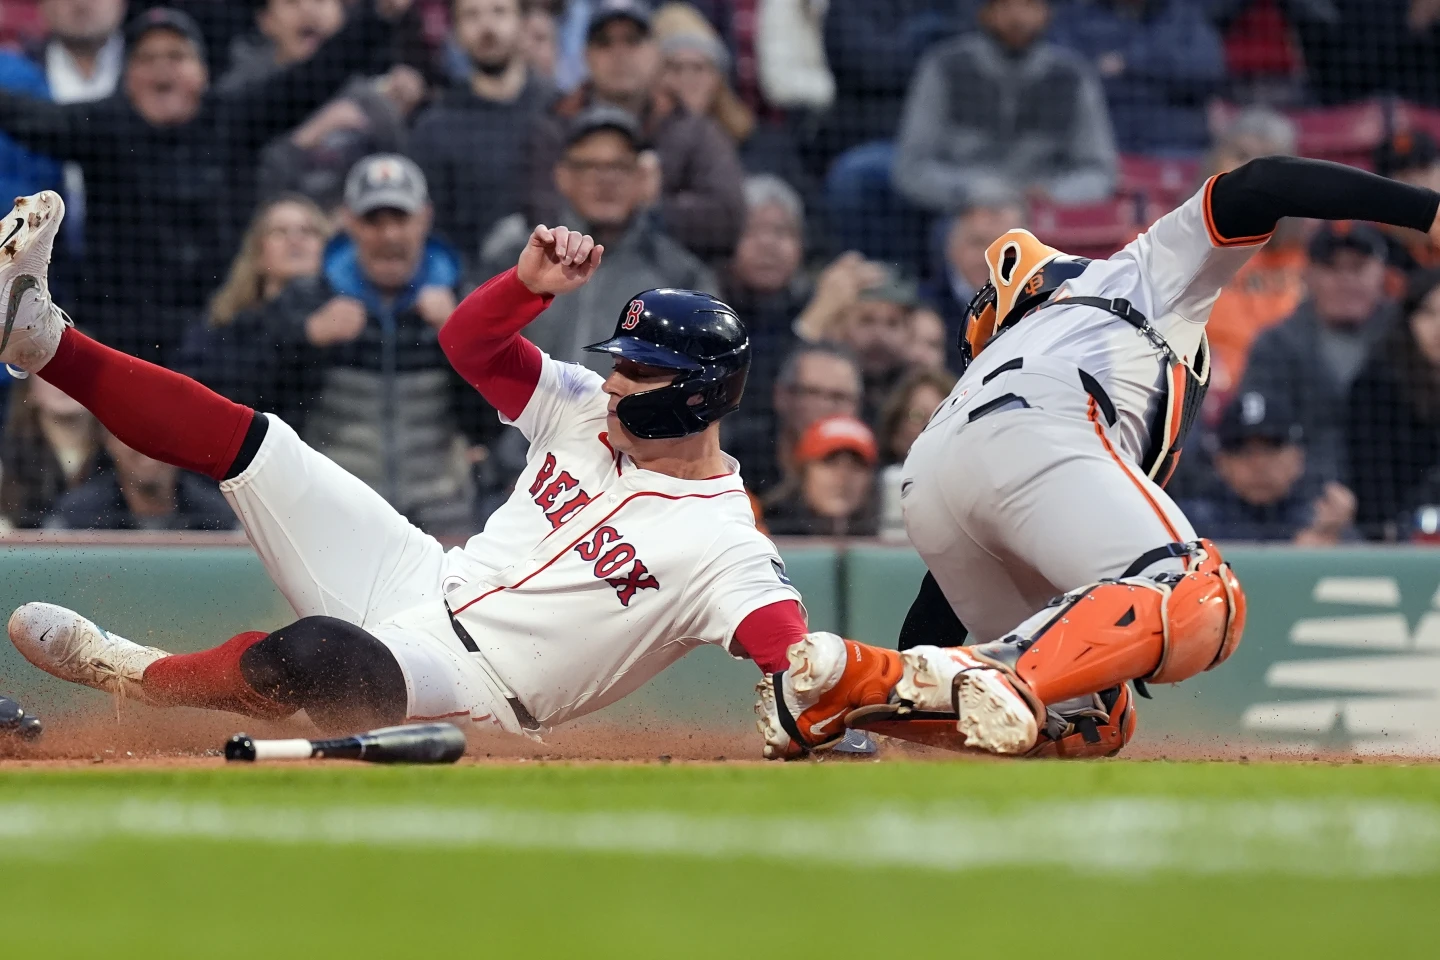 Abreu and Criswell guide the Boston Red Sox to a 4-0 victory against the San Francisco Giants, marking their sixth shutout of the season - Sports Al Dente